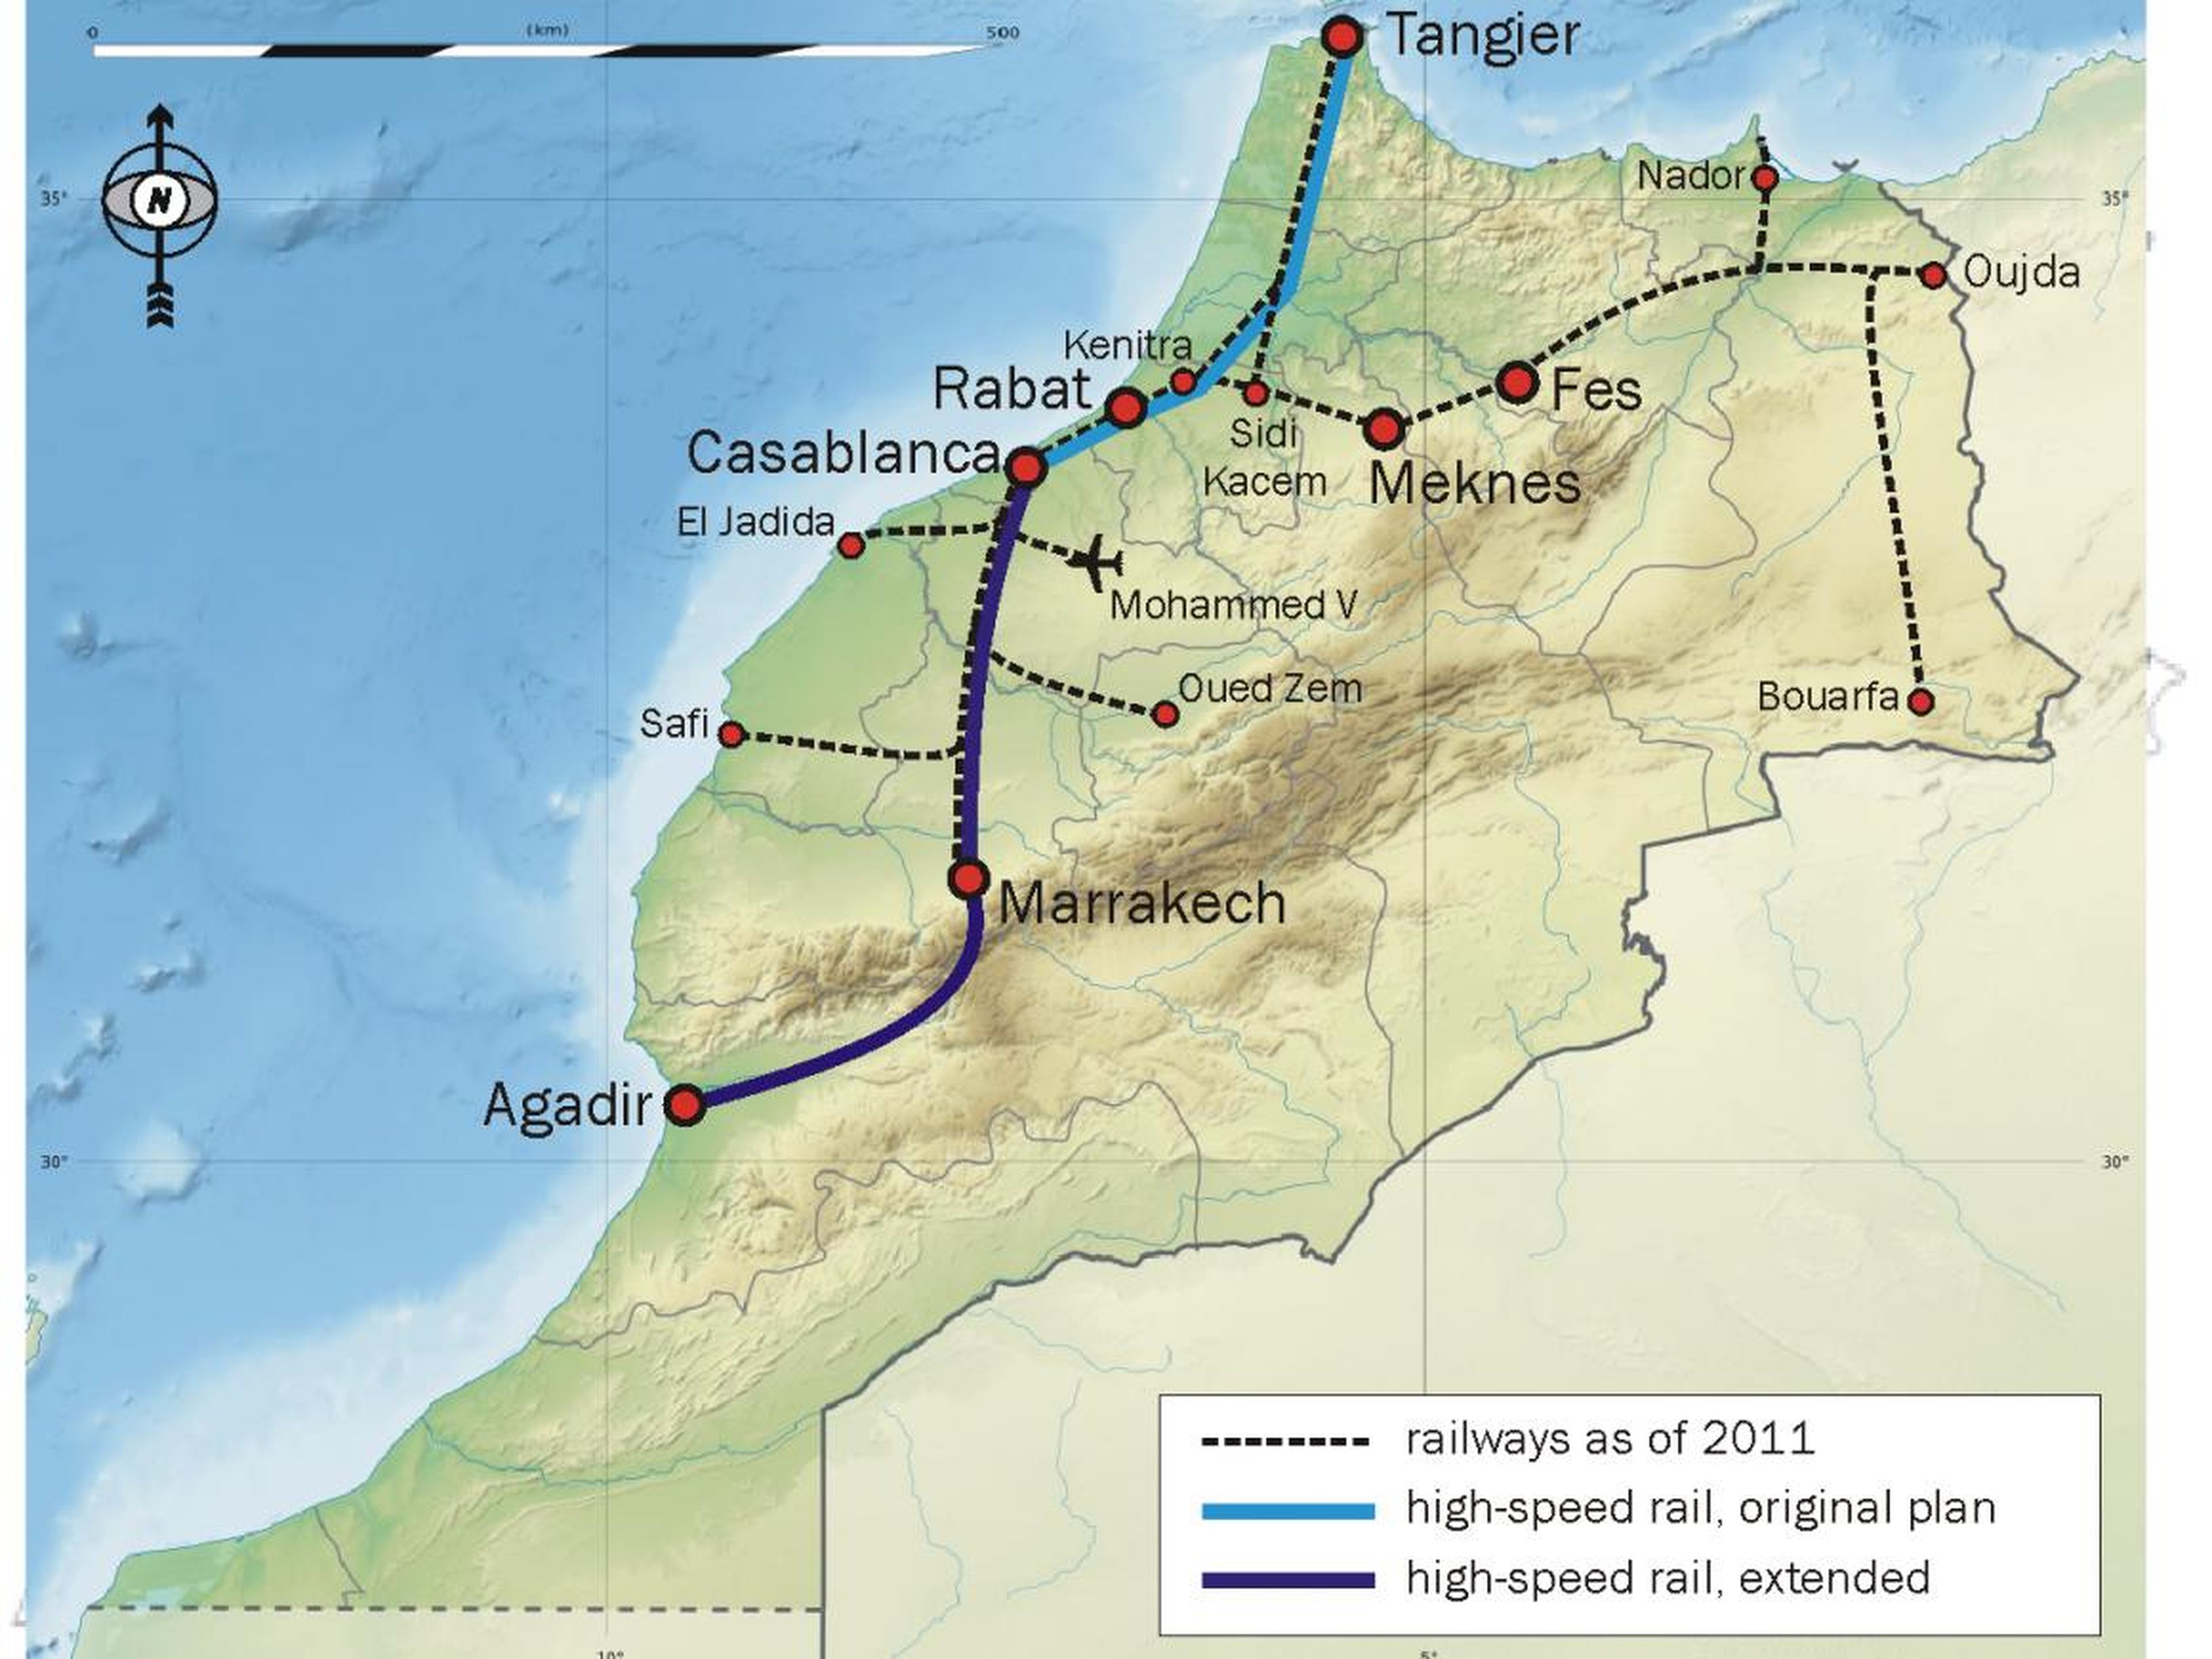 While Morocco already has an extensive rail network that serves 40 million passengers, the country has been developing high-speed rail for a decade.